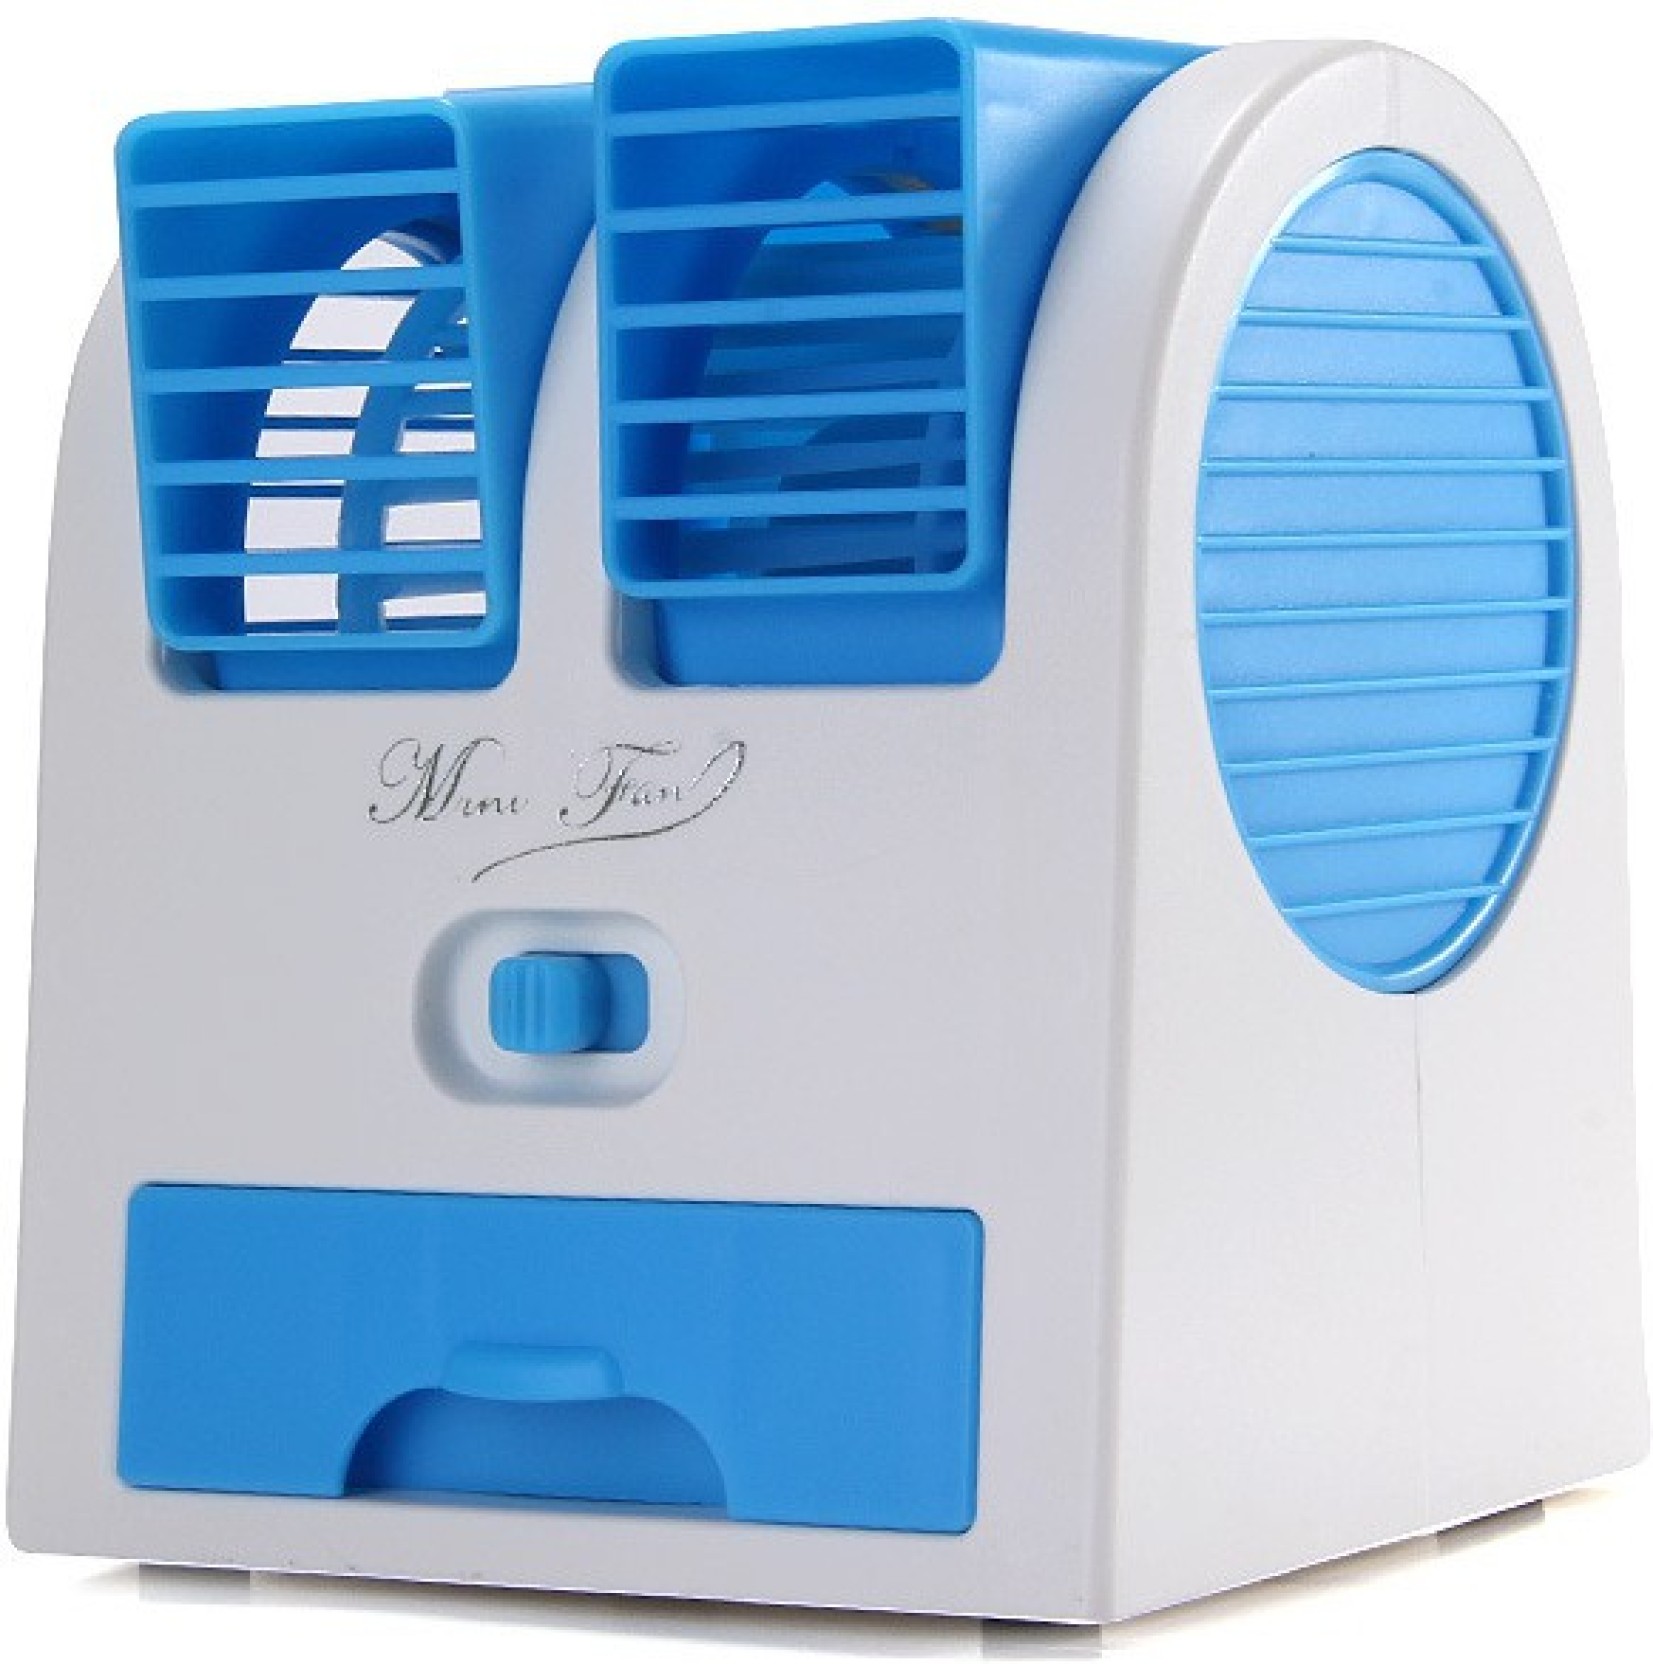 Mini Fan Air Cooler With Water Tray Portable Desktop Dual Bladeless Air Cooler USB